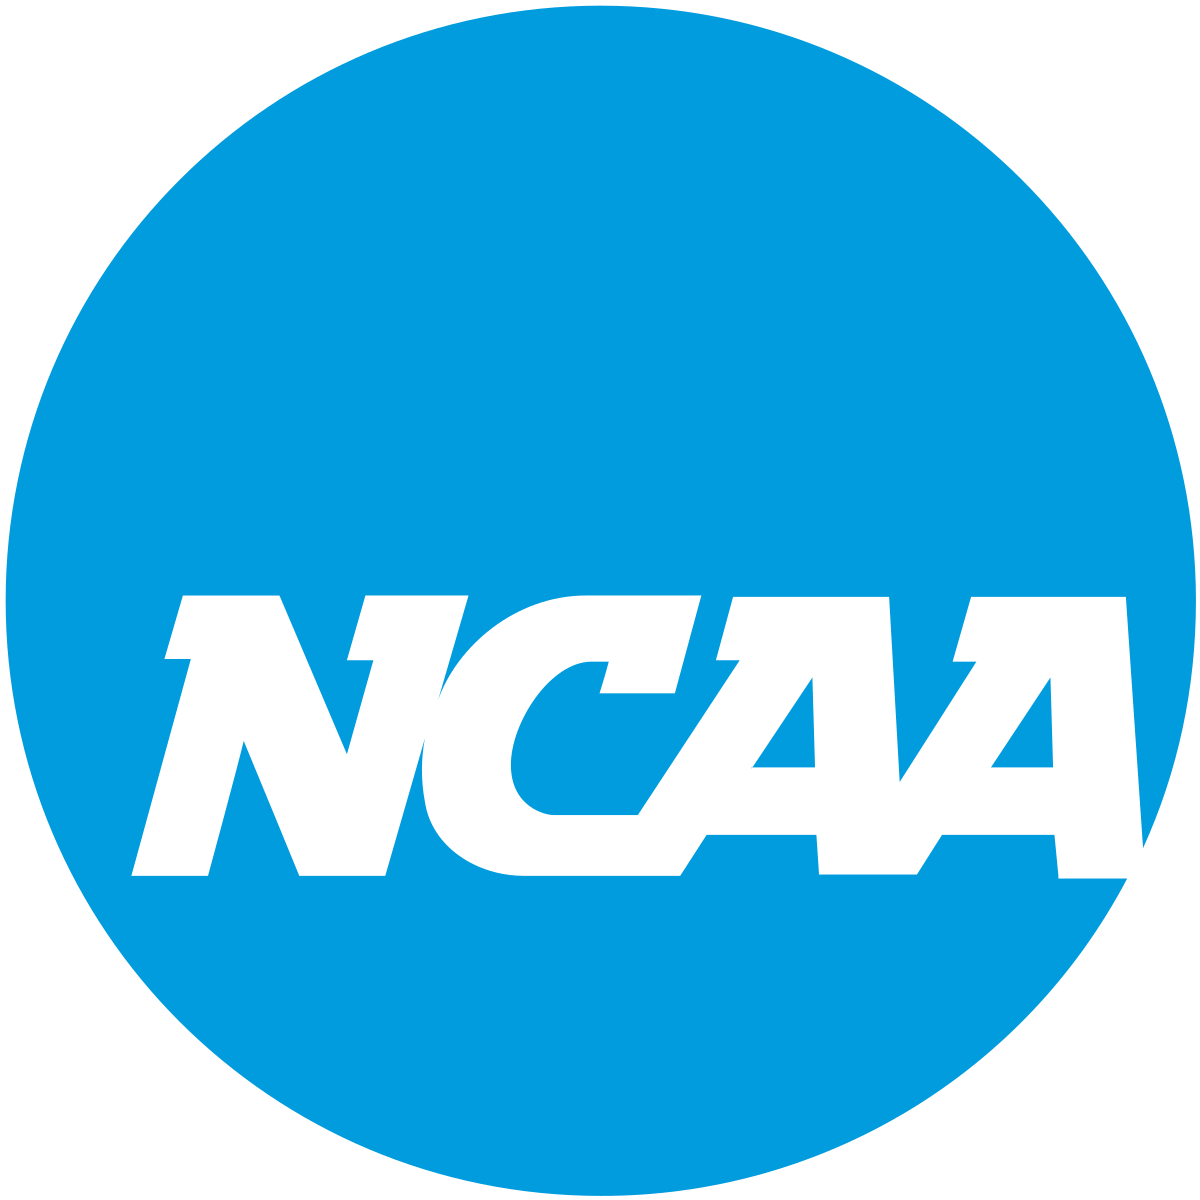 NCAA wants prop bets banned